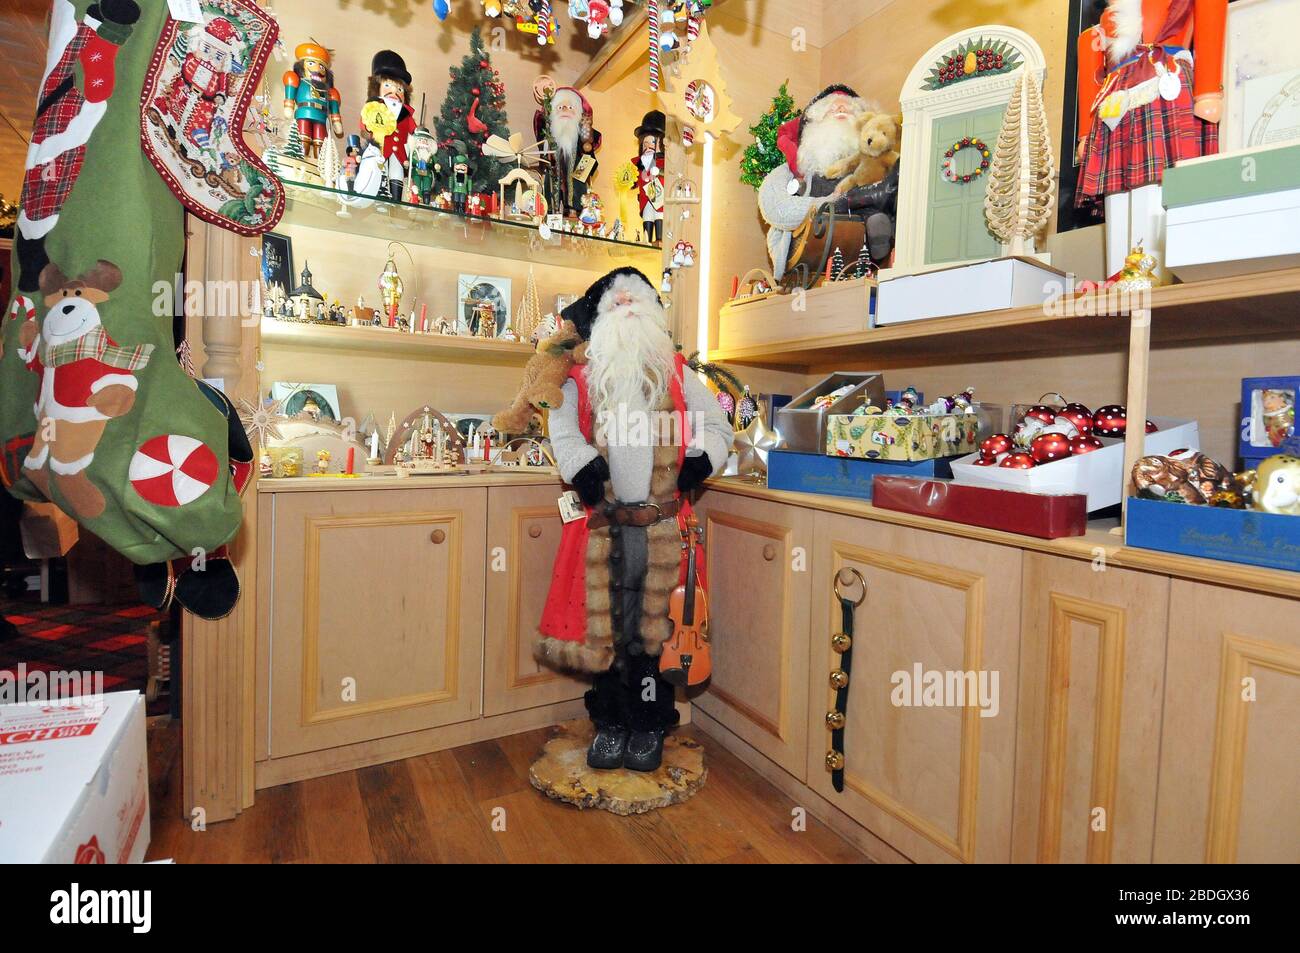 Middleburg, VA - December 12, 2008 -- Interior of The Christmas Sleigh; 5A East Washington, Street; Middleburg, Virginia 20118, owned by Linda Tripp Rausch and her husband, Dieter Rausch  on Friday, December 12, 2008.Credit: Ron Sachs / CNP (RESTRICTION: NO New York or New Jersey Newspapers or newspapers within a 75 mile radius of New York City) Photo via Newscom Stock Photo